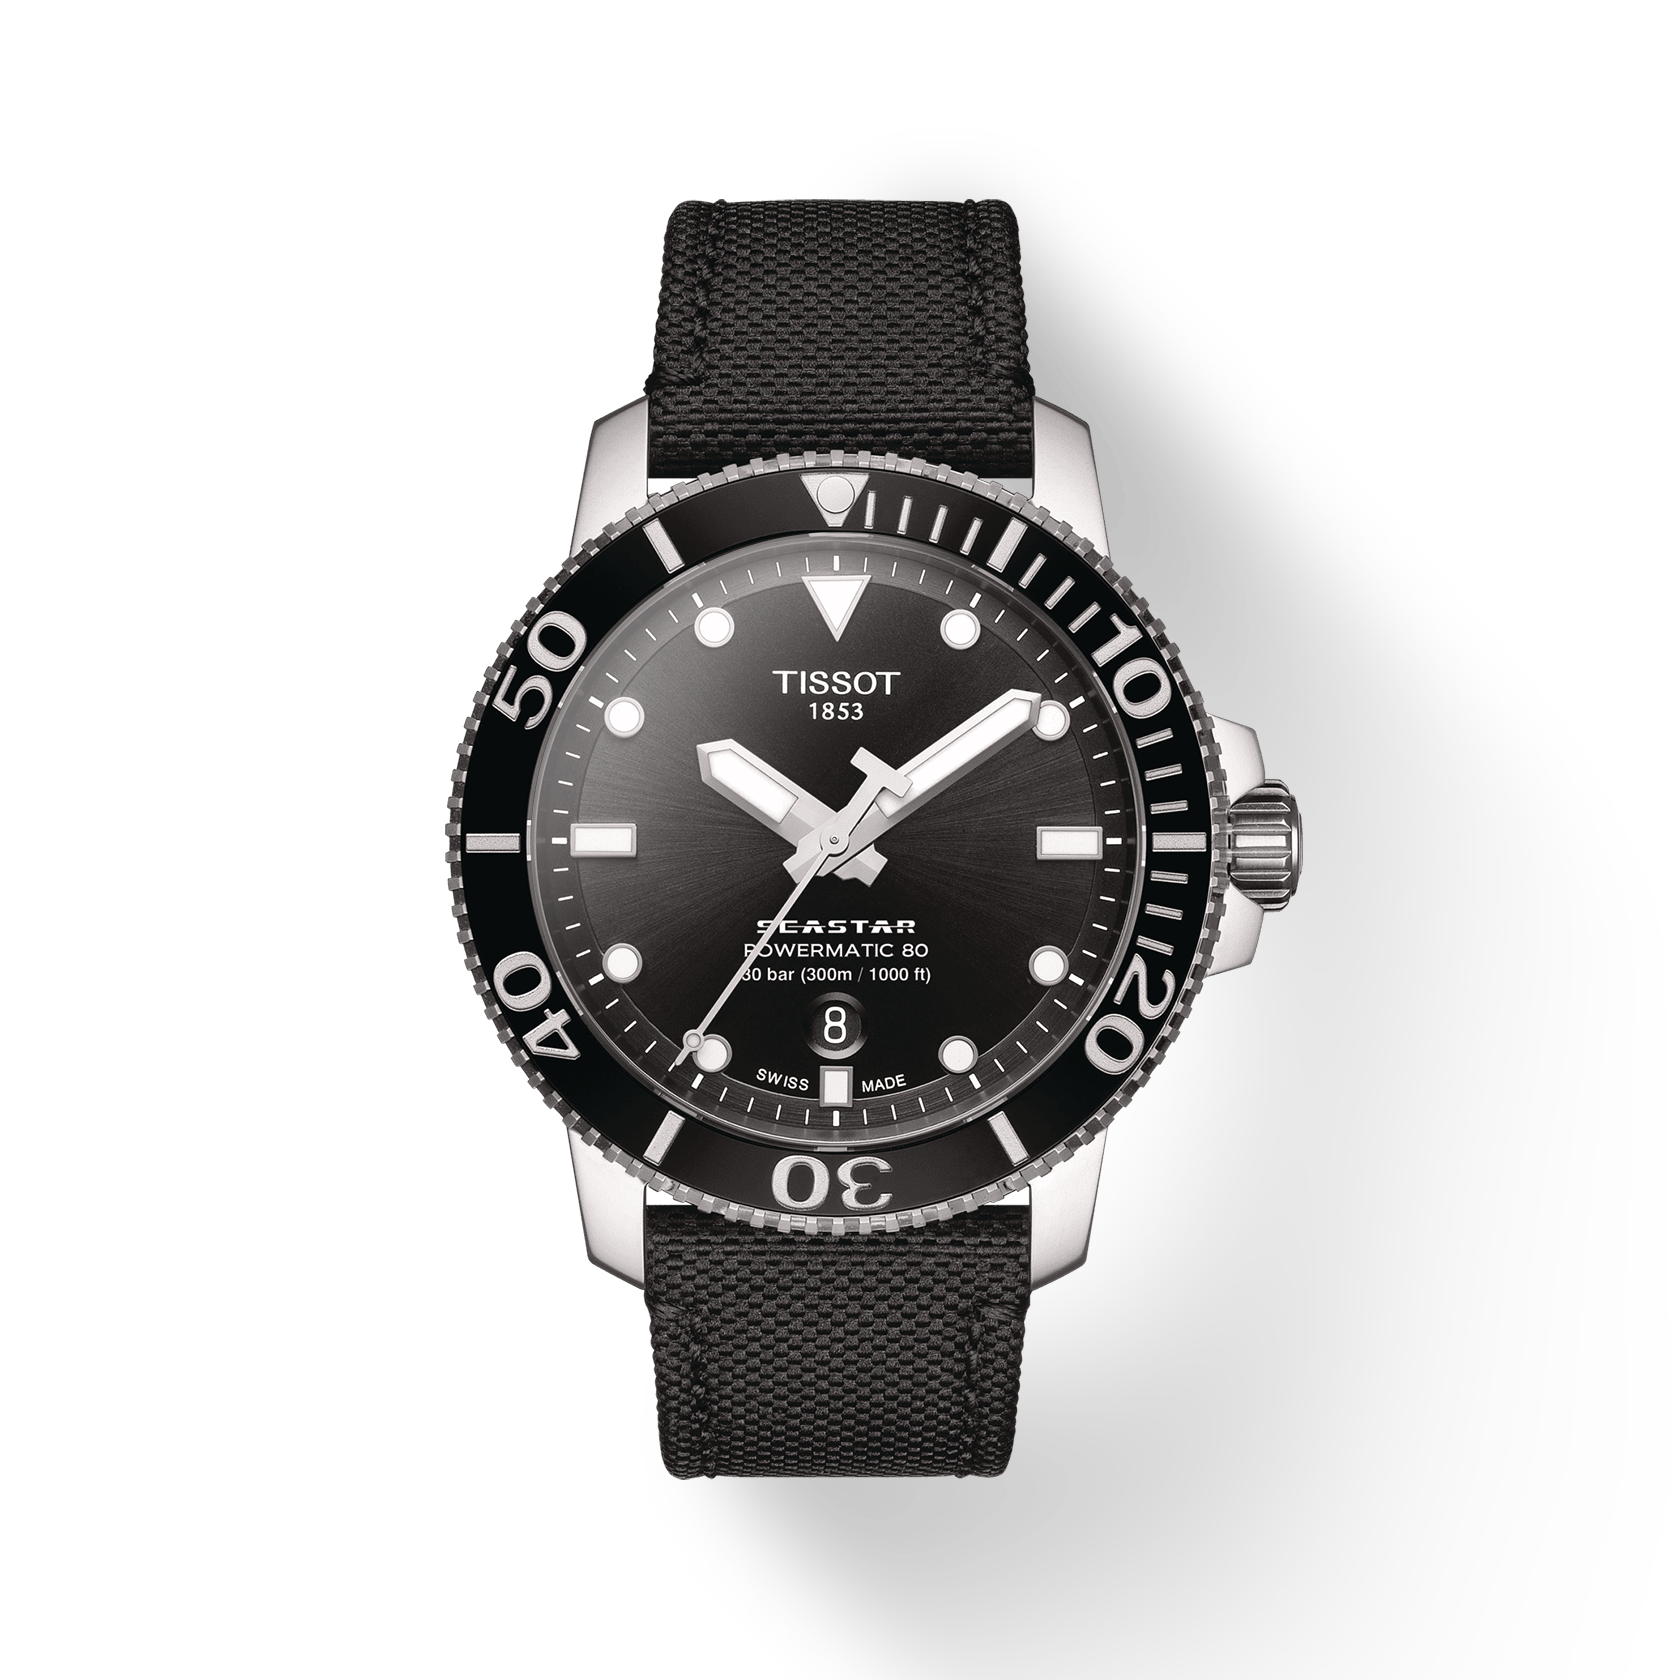 Are Tissot watches waterproof?